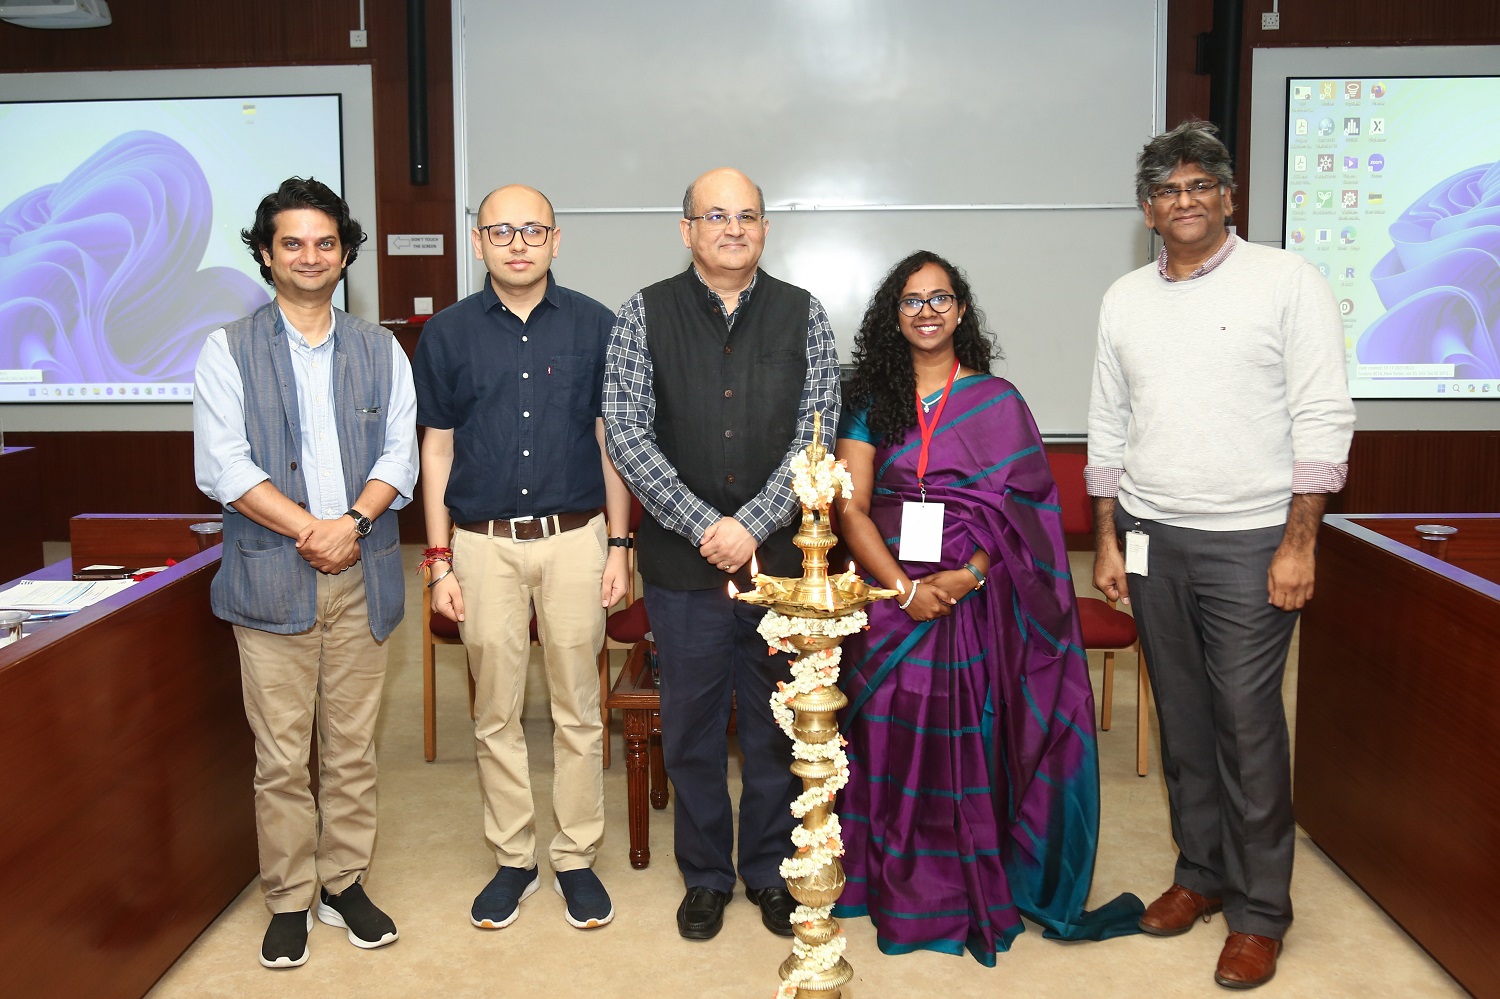 (L-R) Prof. Abhinav Anand, Finance & Accounting area, IIMB; Prof. Tarun Jain, Chairperson and faculty, Production & Operations Management area, IIMB; Prof. Rishikesha T Krishnan, Director, IIMB; Pavithra I, Research Associate, IIMB; M S Ganesh, General Manager, Capacity Supply Chain & Provisioning, Microsoft Azure, lights the lamp to inaugurate the Eighth Biennial Supply Chain Management Conference on 5th January 2024.